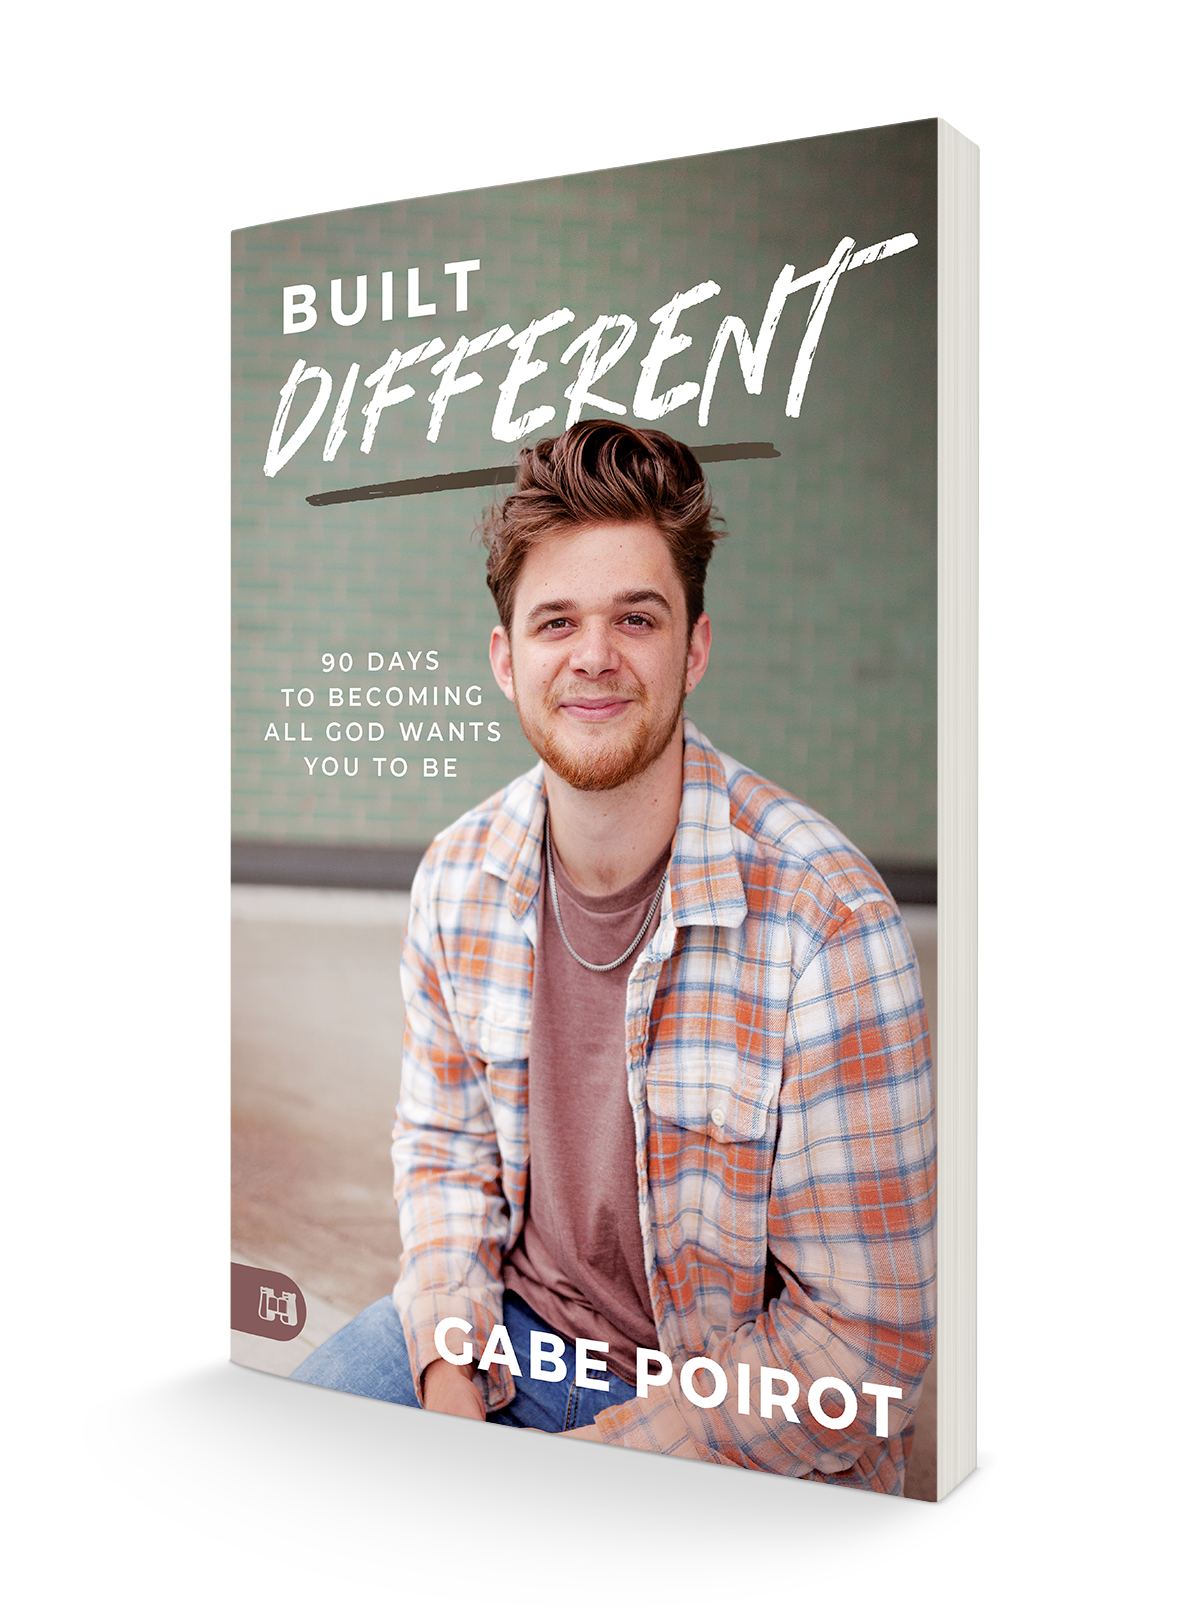 Built Different: 90 Days to Becoming all God Wants You to Be Paperback – December 20, 2022